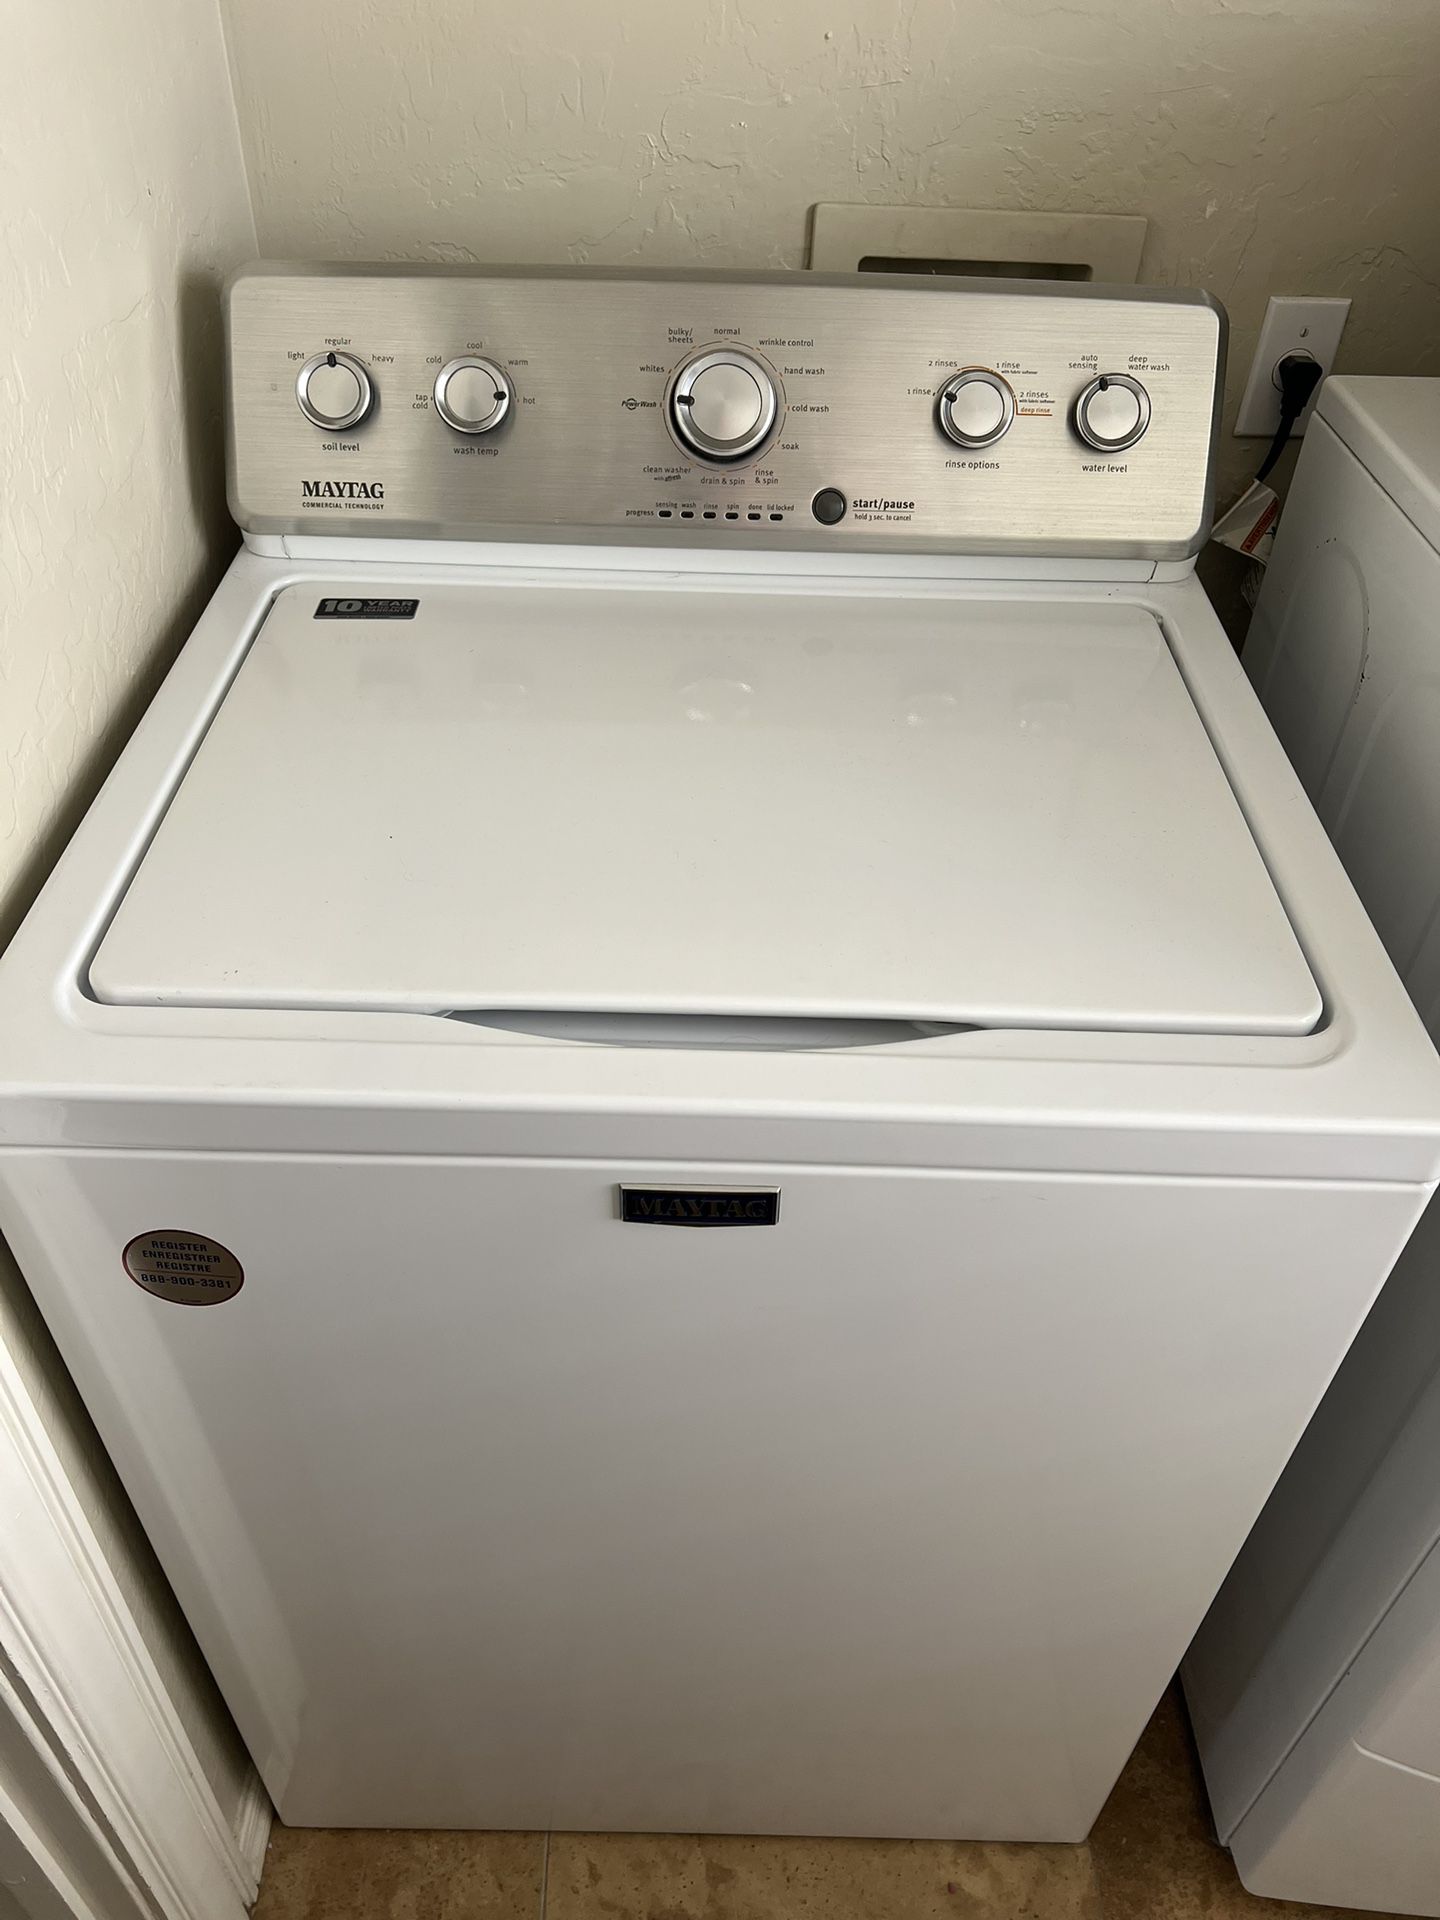 Washer & Dryer For Sale-$350 For Set!